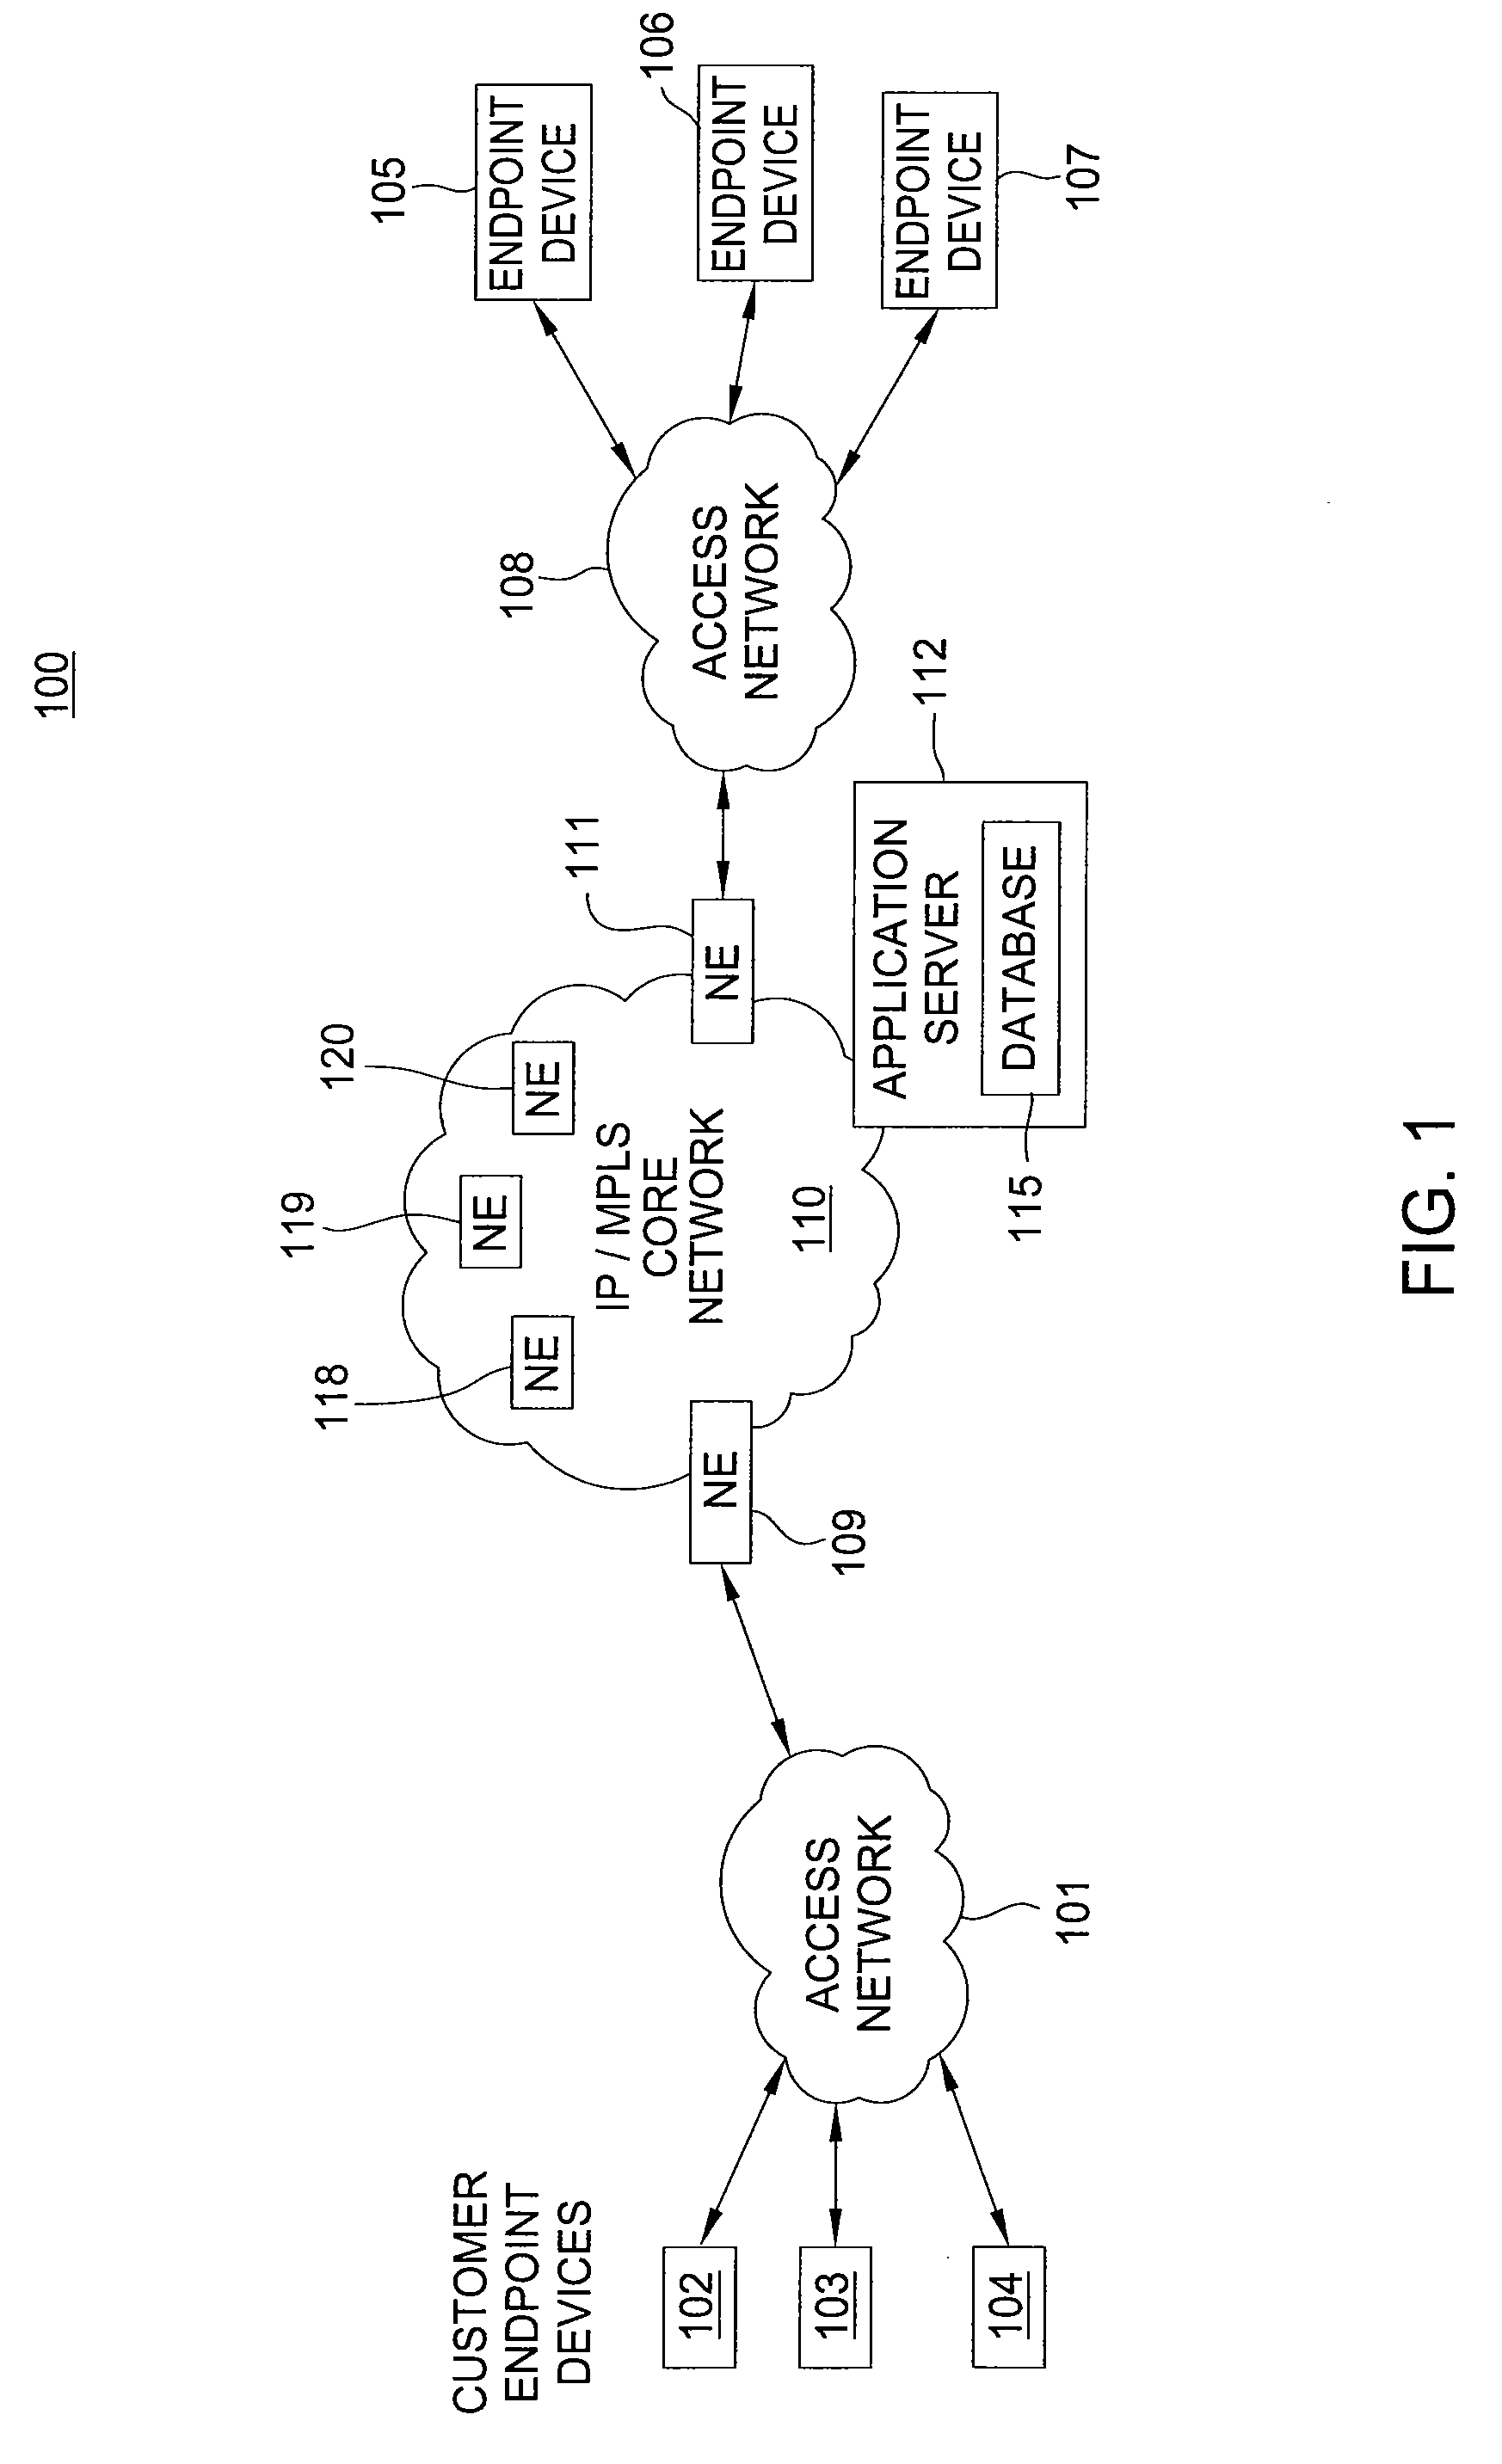 Method and apparatus for providing security in an intranet network